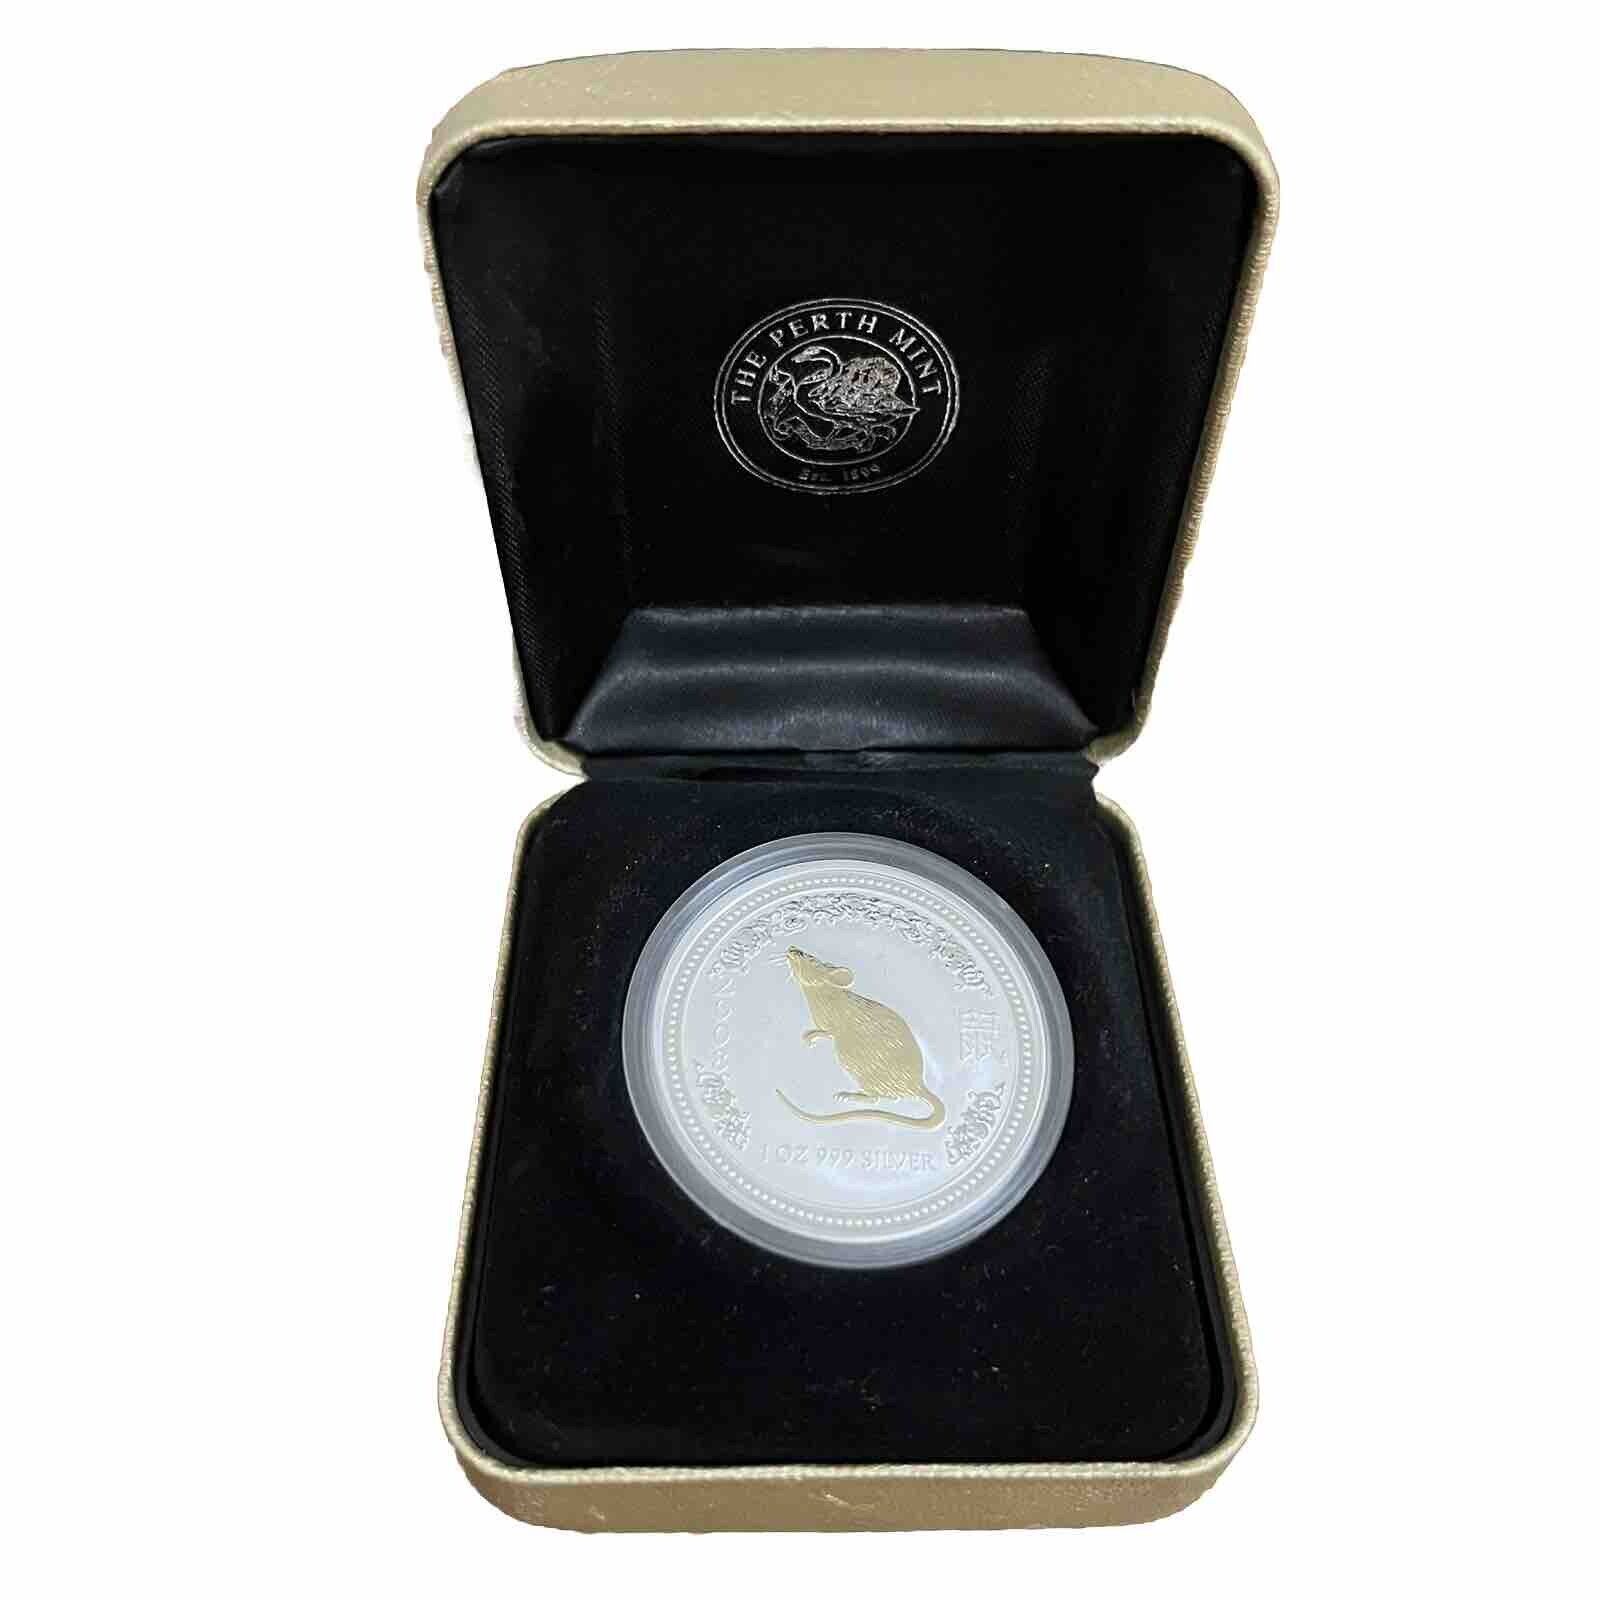 2007 2008 Lunar Year of the Mouse Gold Gilded 1oz Silver Coin Australia Series 1